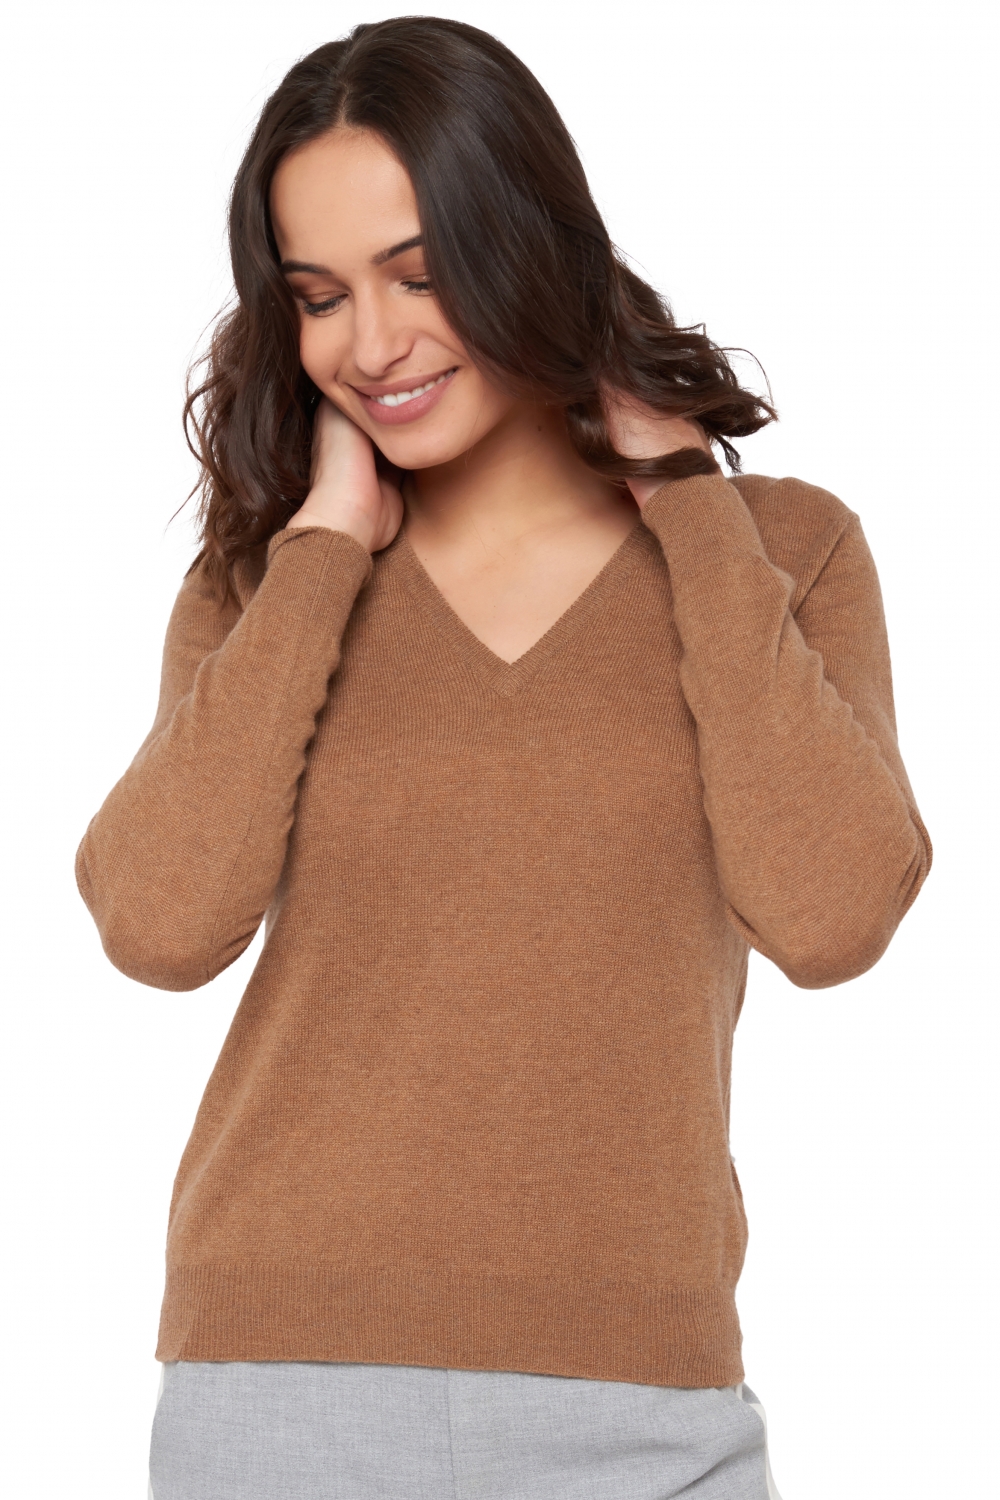 Cachemire pull femme faustine camel chine 3xl